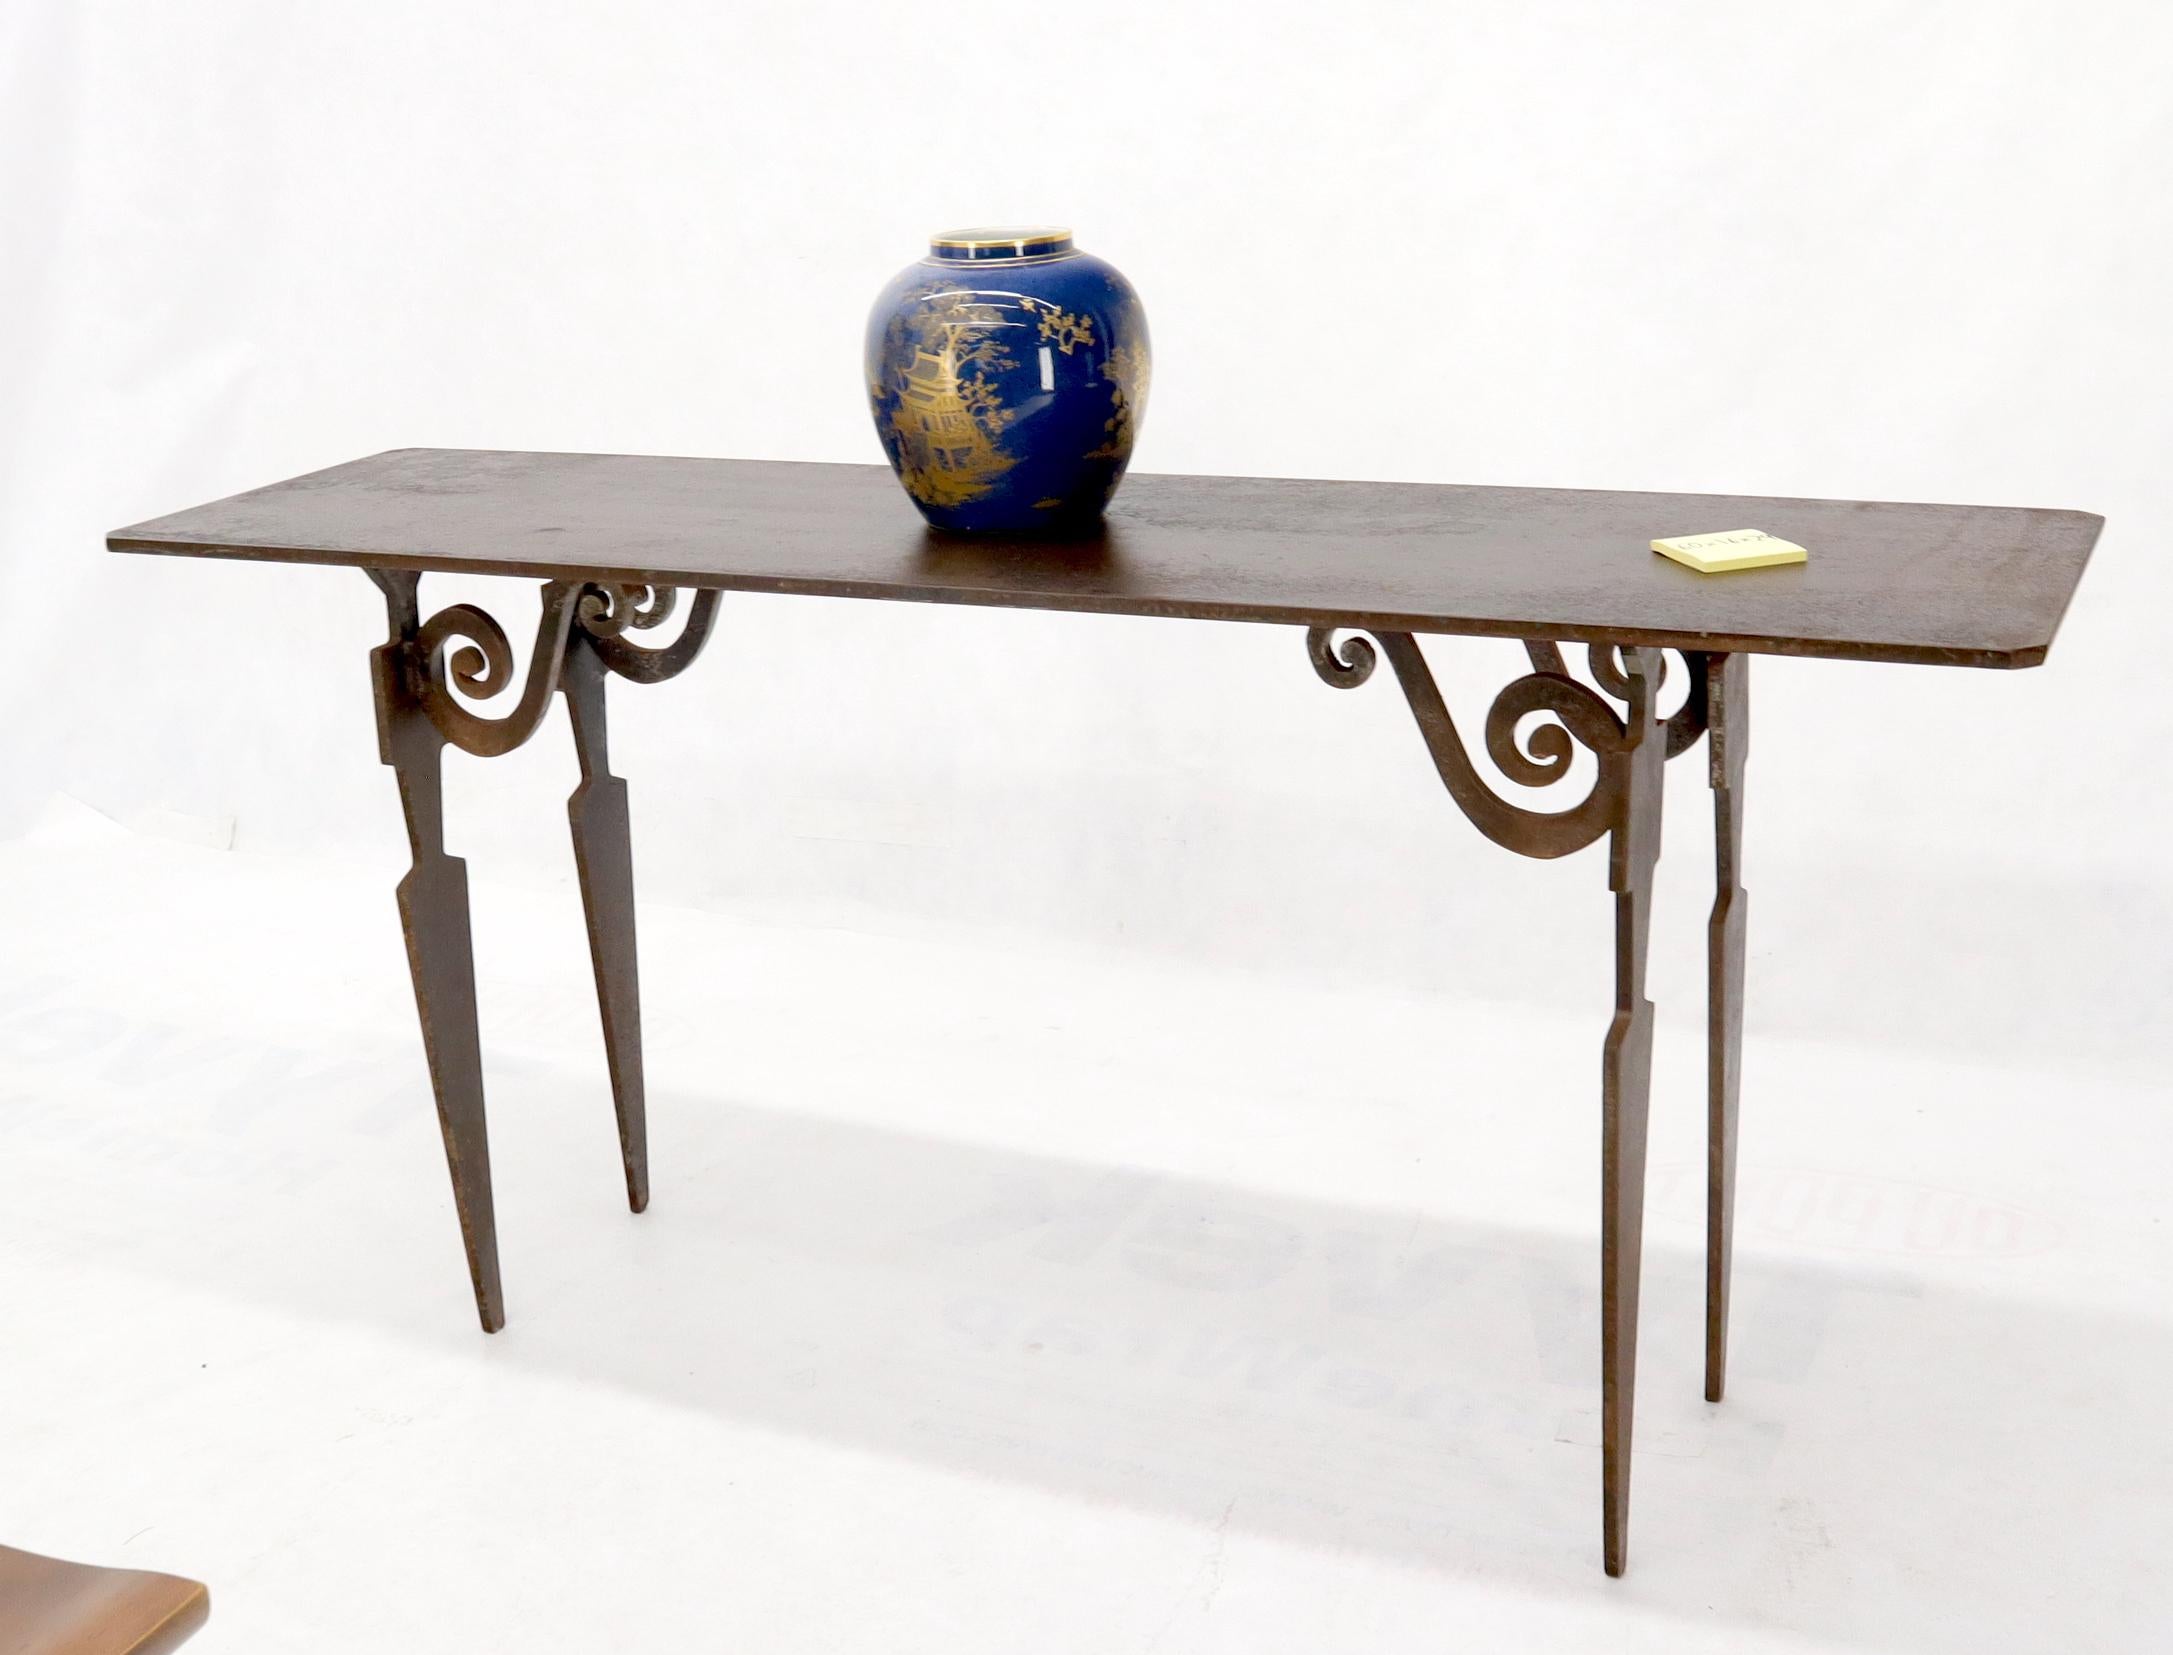 20th Century Thick Solid Steel Plate Top Cut Steel Legs Coffee Table Steam Punk Console Table For Sale